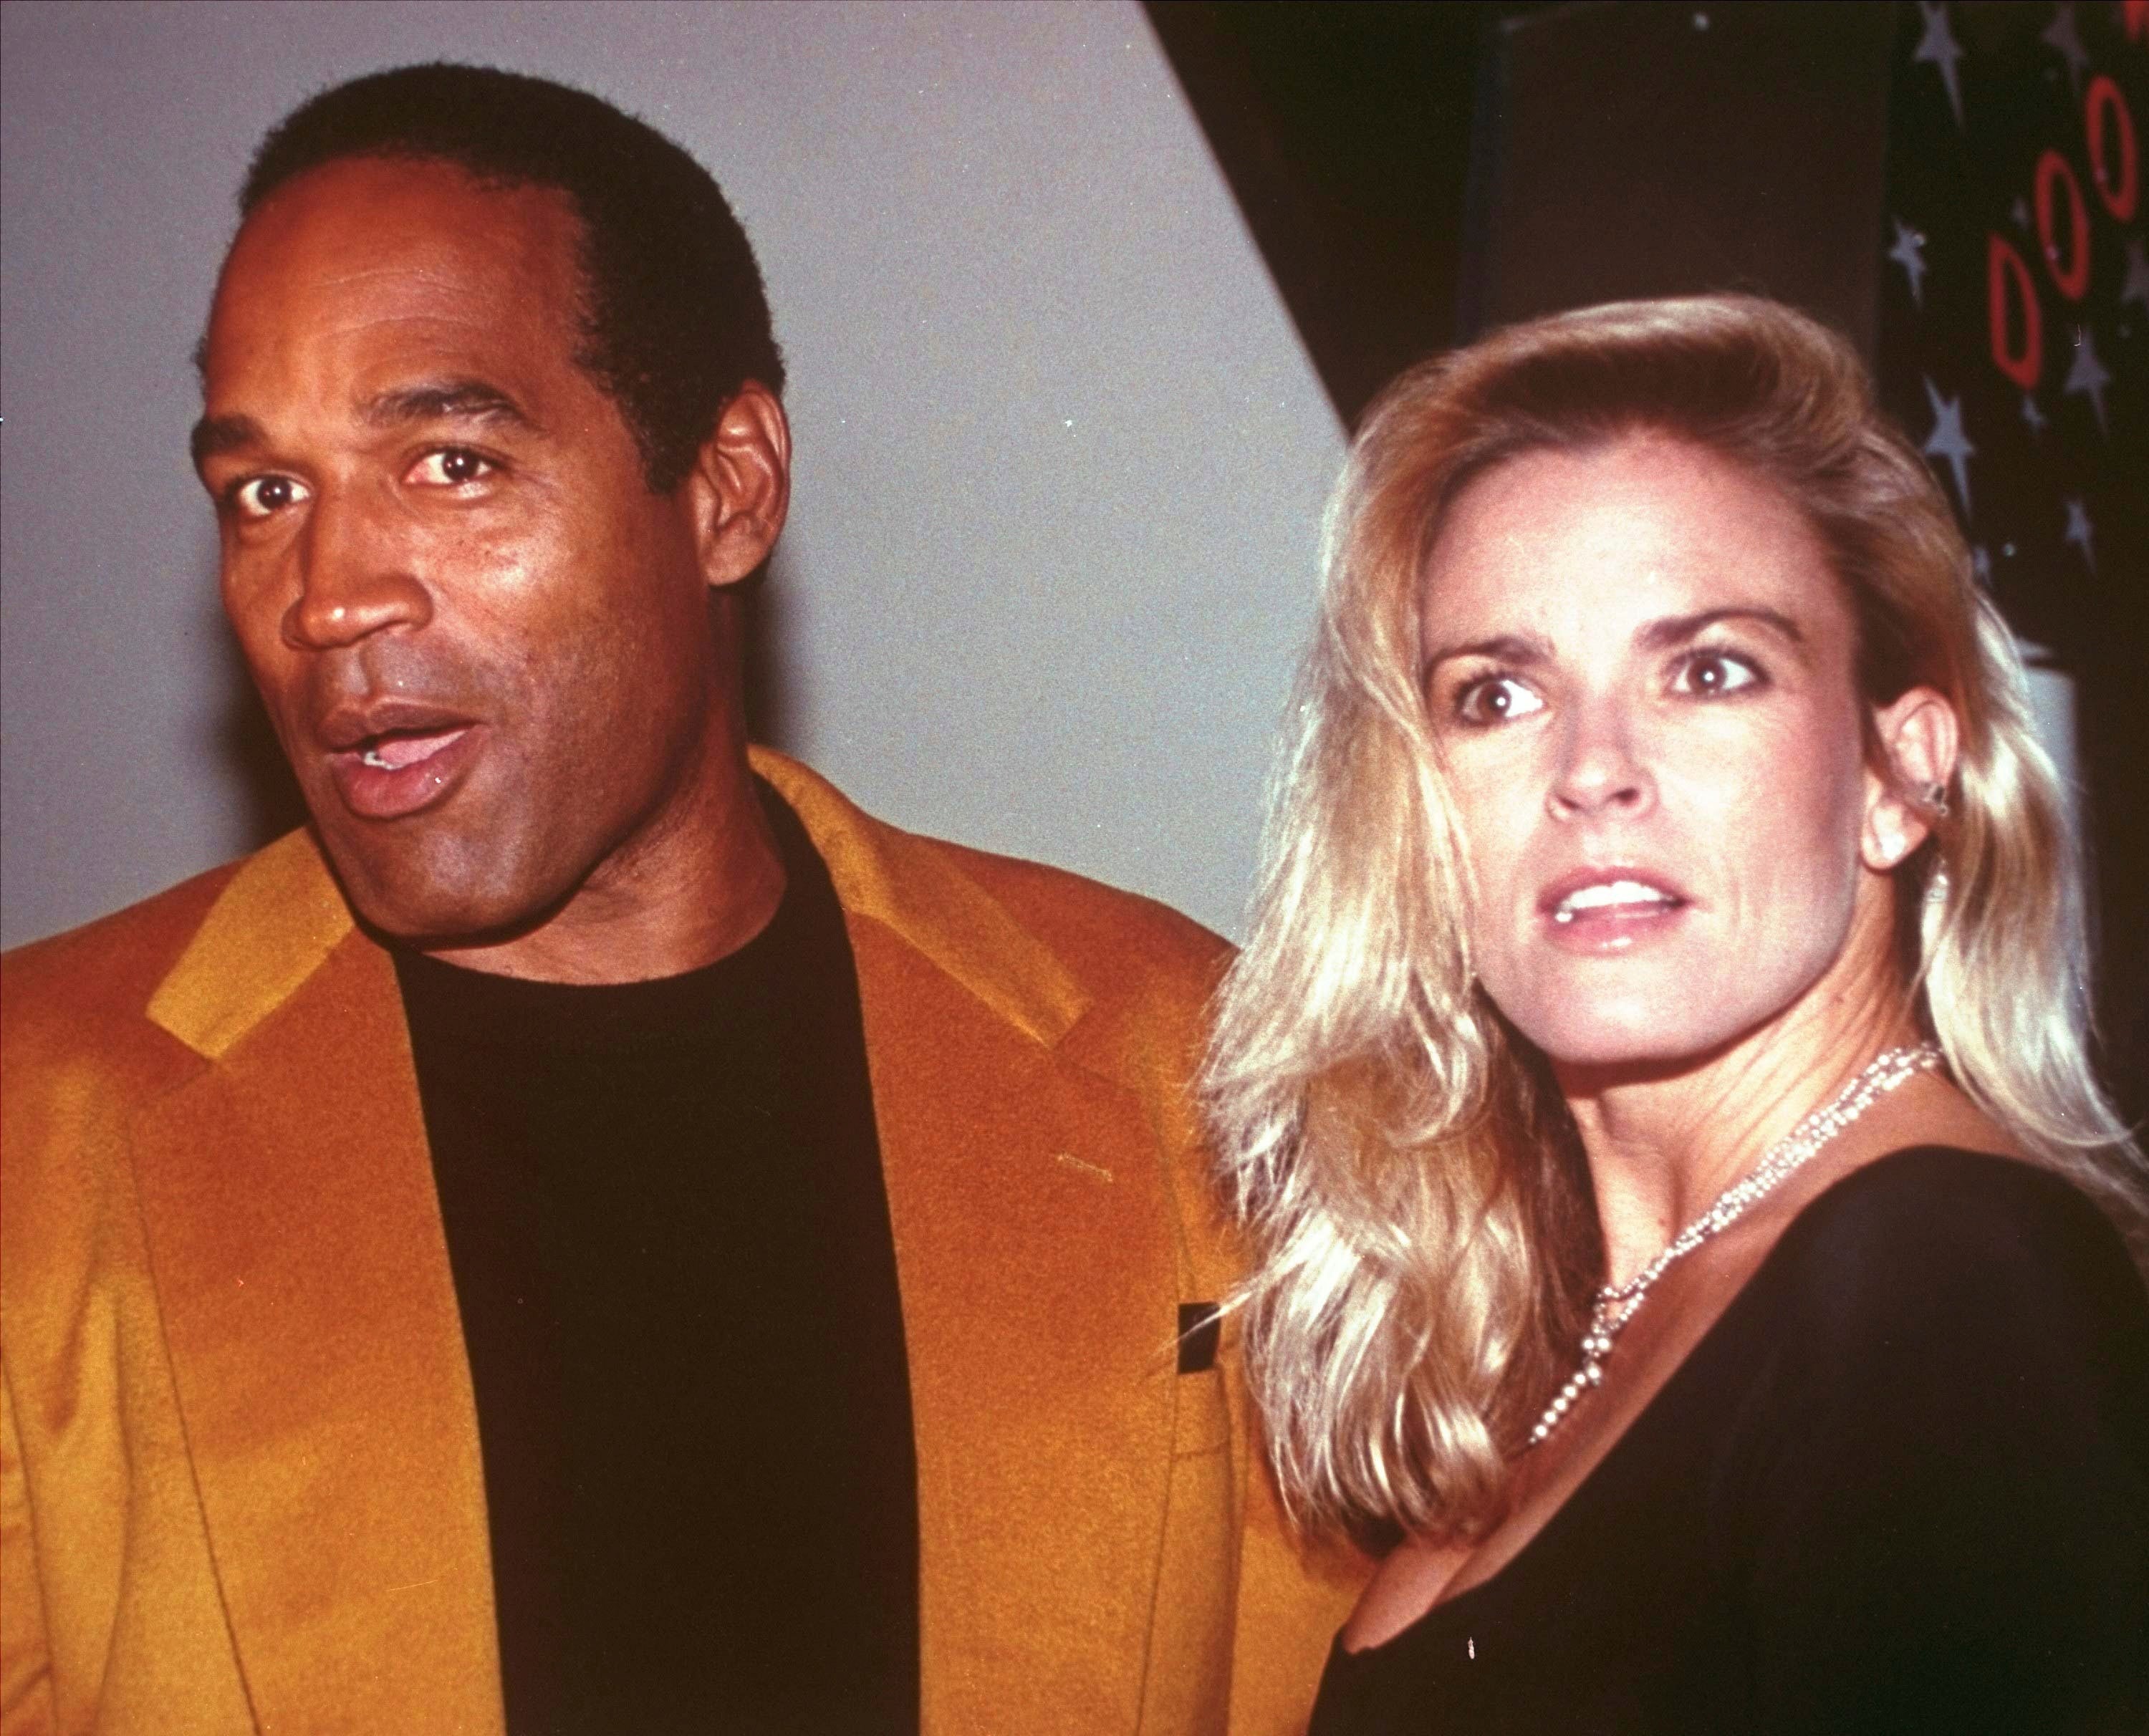 OJ Simpson emerged as a prime suspect in the murder of Nicole Brown Simpson and her friend Ronald Goldman